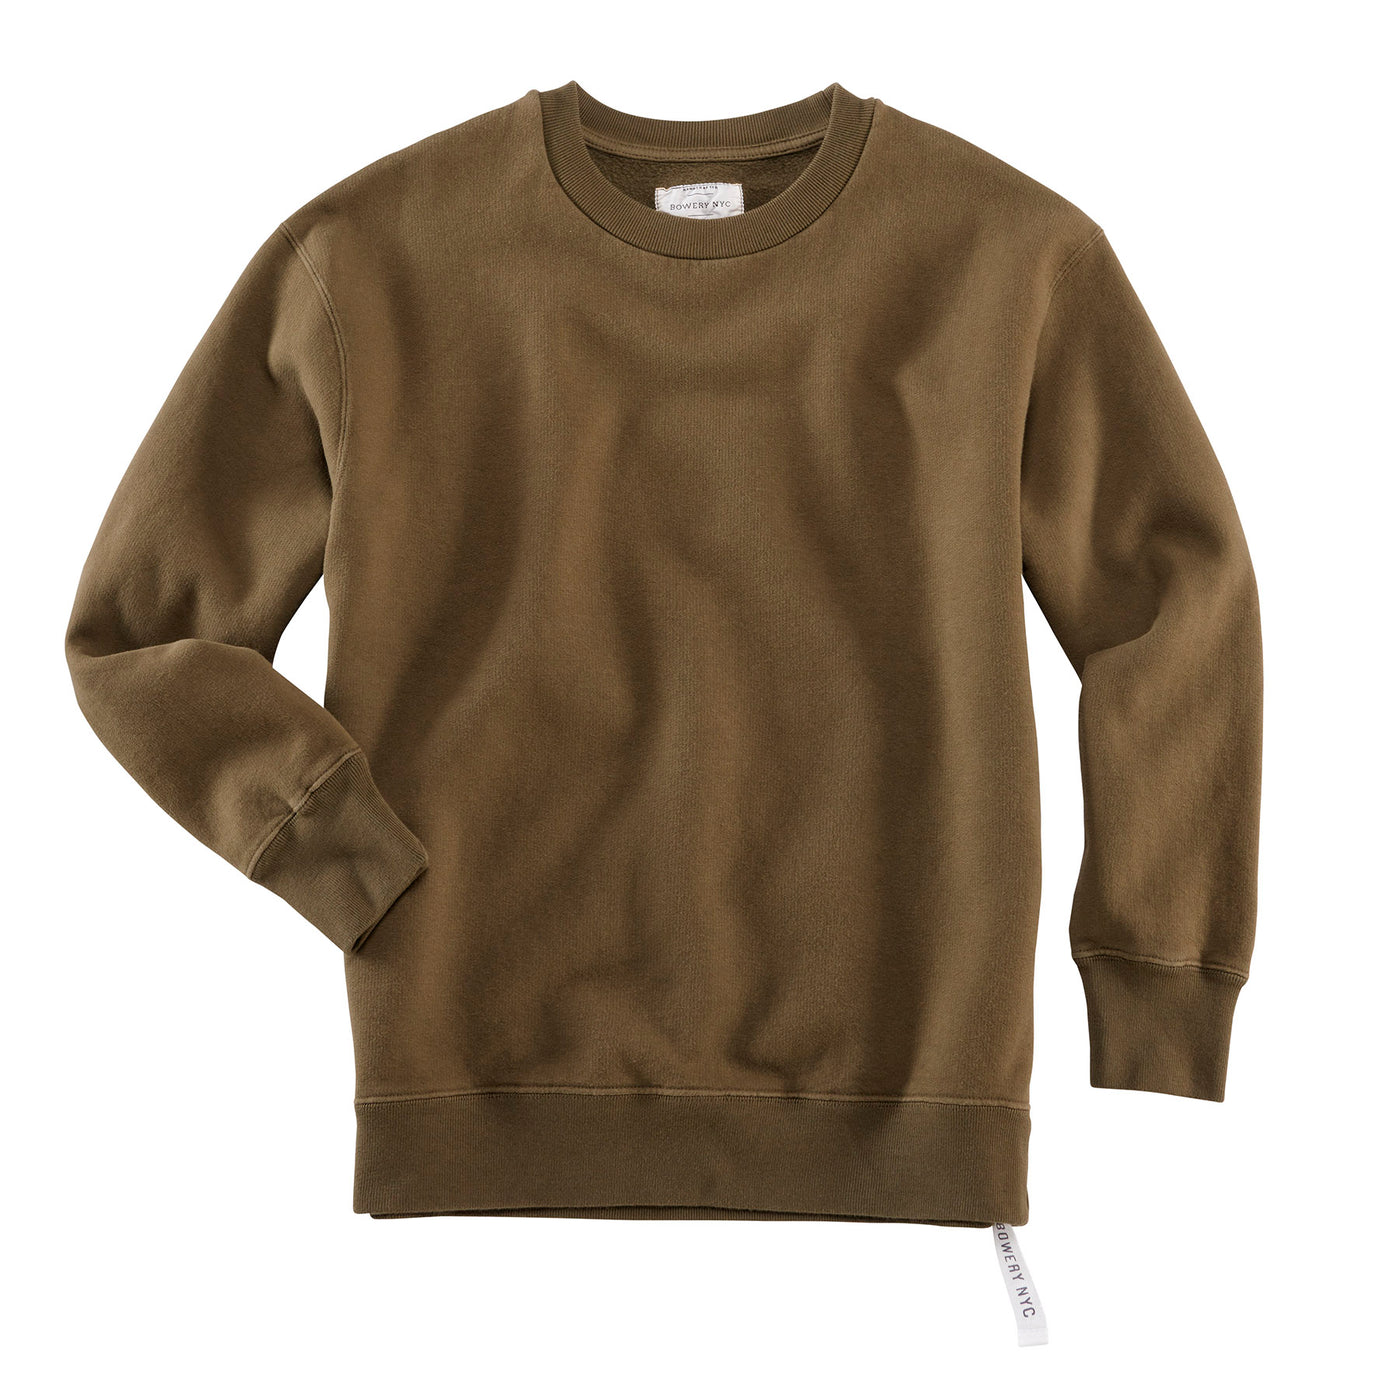 Bowery NYC Women's Essential Olive Sweater